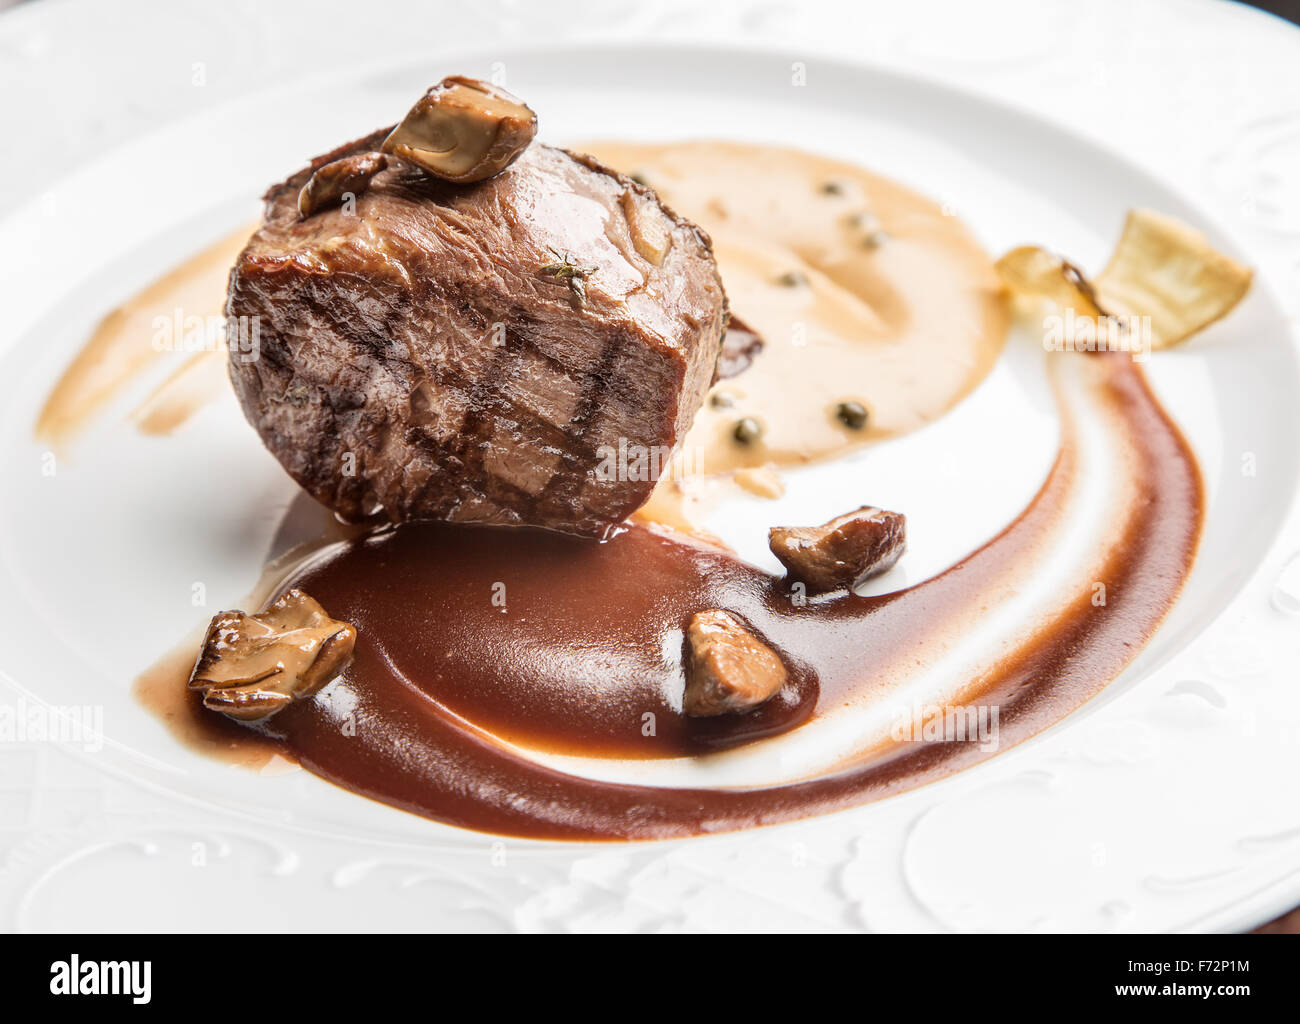 Beef steak with tomato sauce on the white plate. Stock Photo